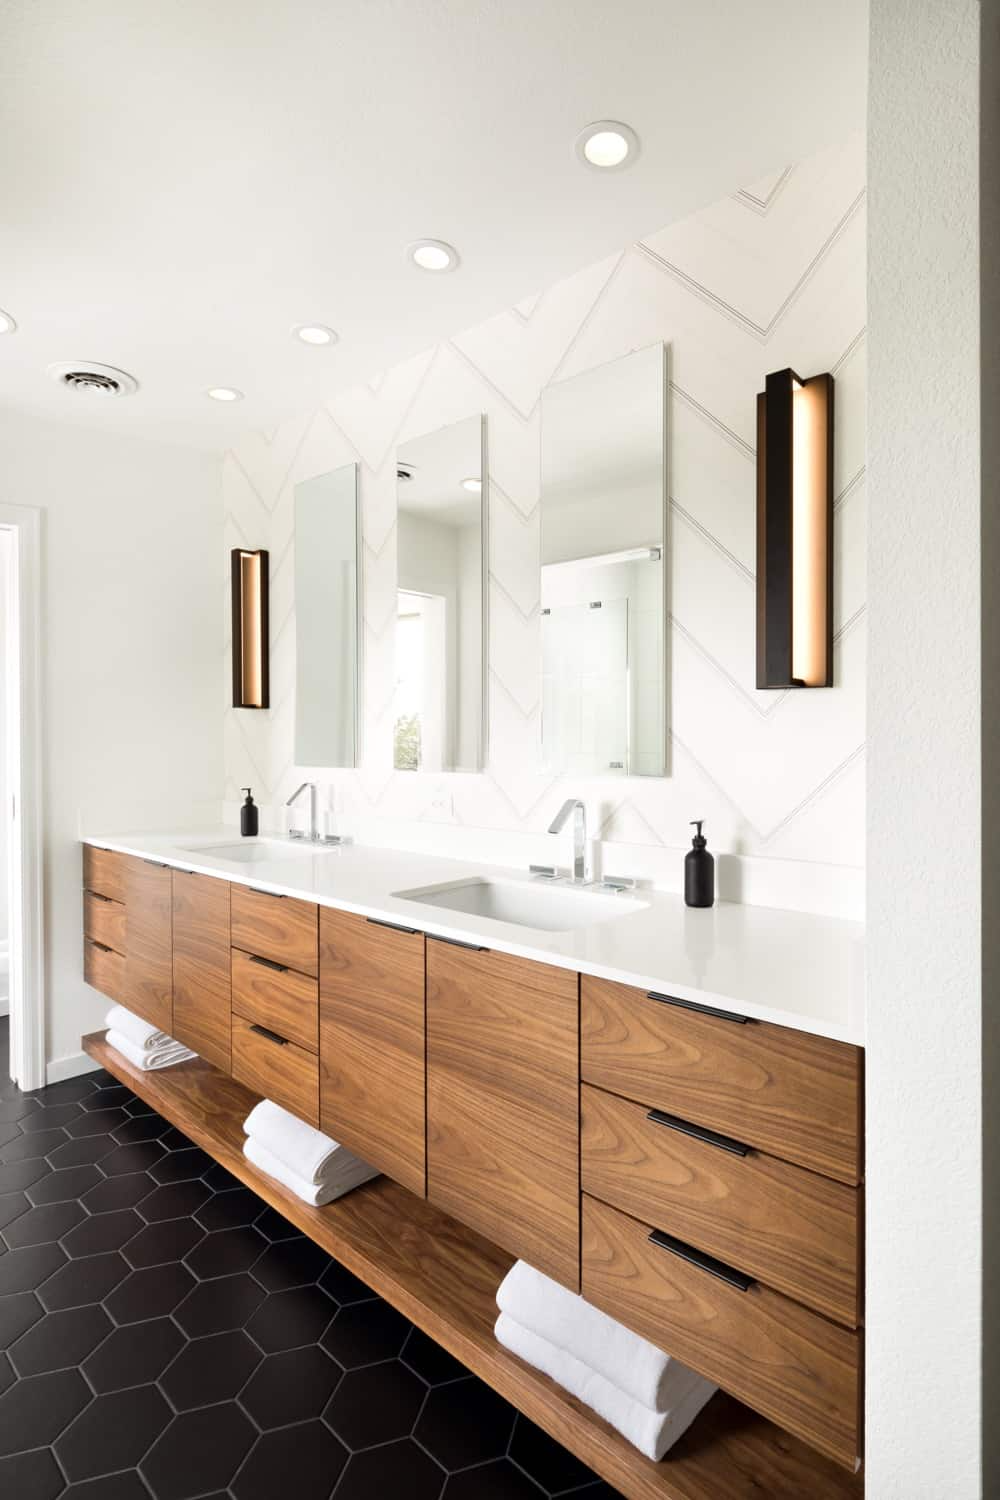 The Essential Elements for Designing a Modern Bathroom